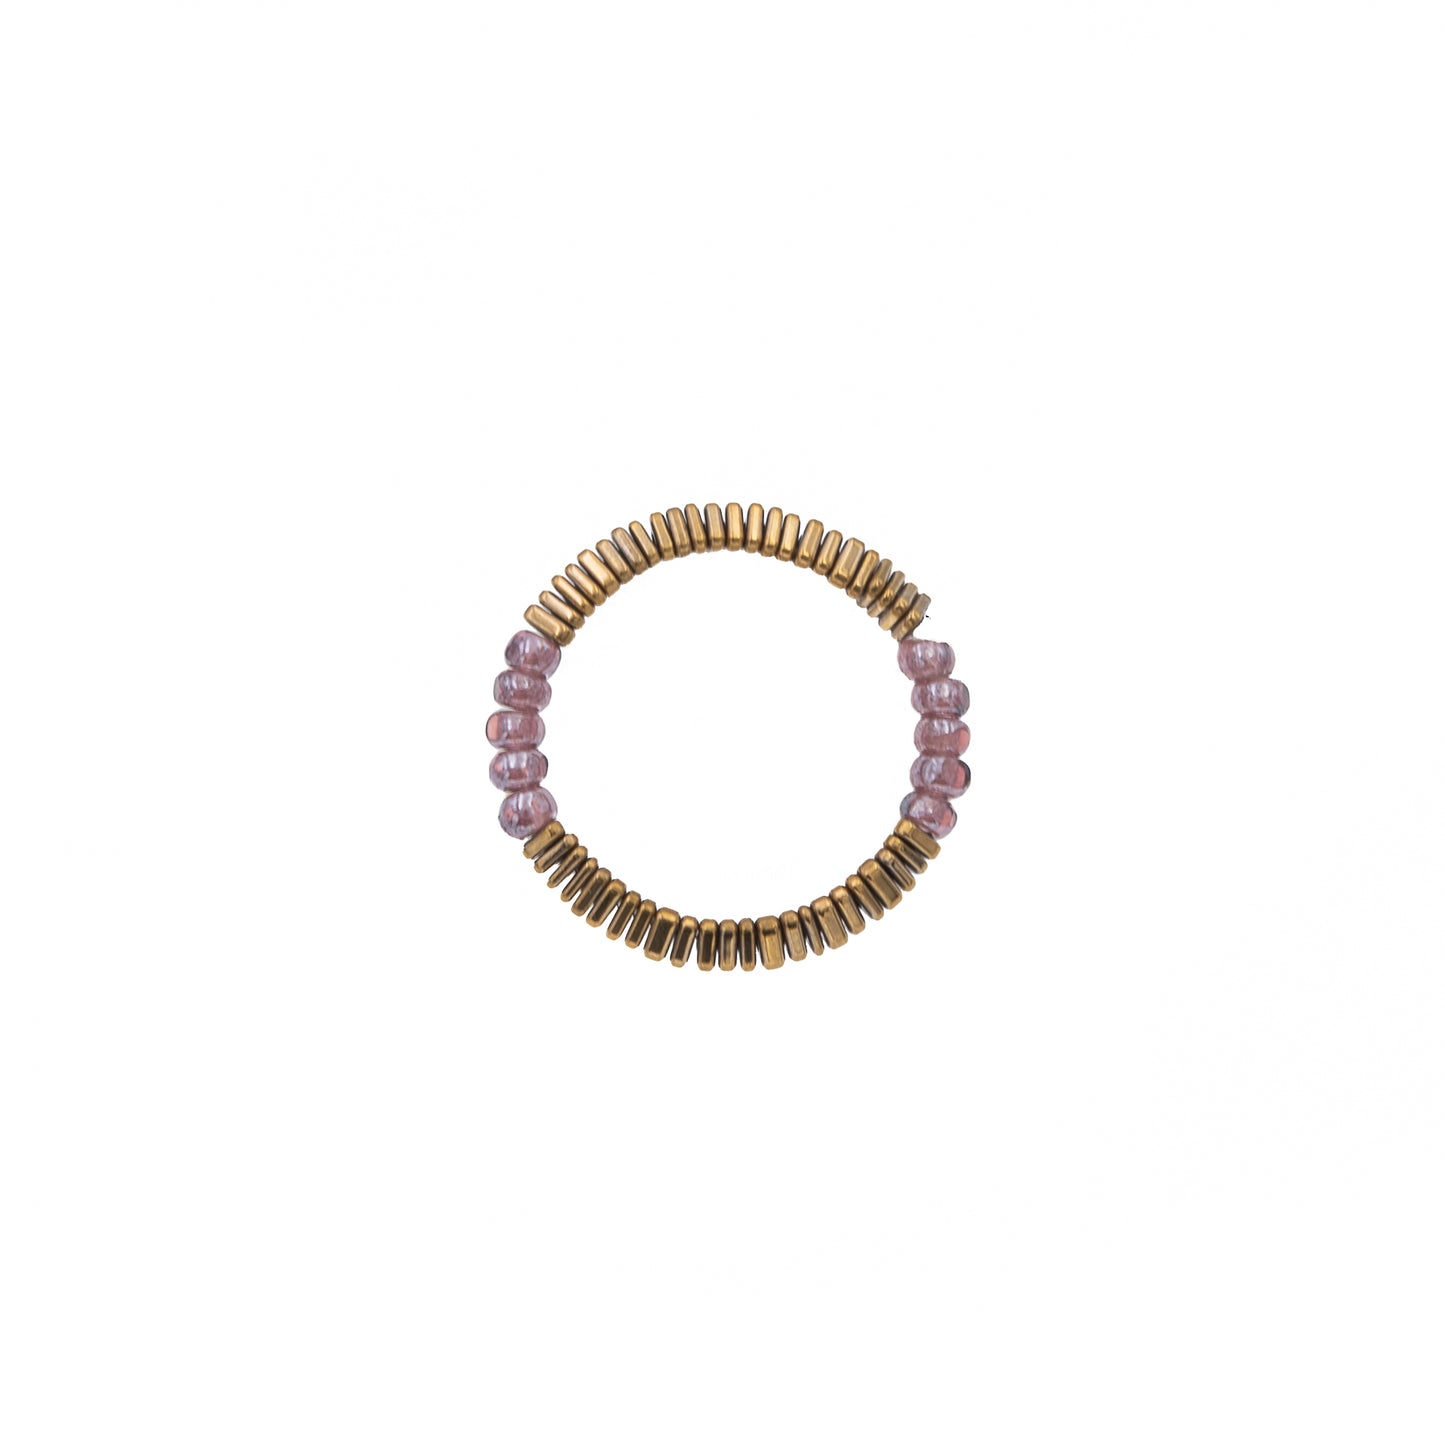 Zurina Ketola Beaded Stretch Ring with Purple Seed Beads and Gold Tiny Triangle Hematite Details on White Background. 